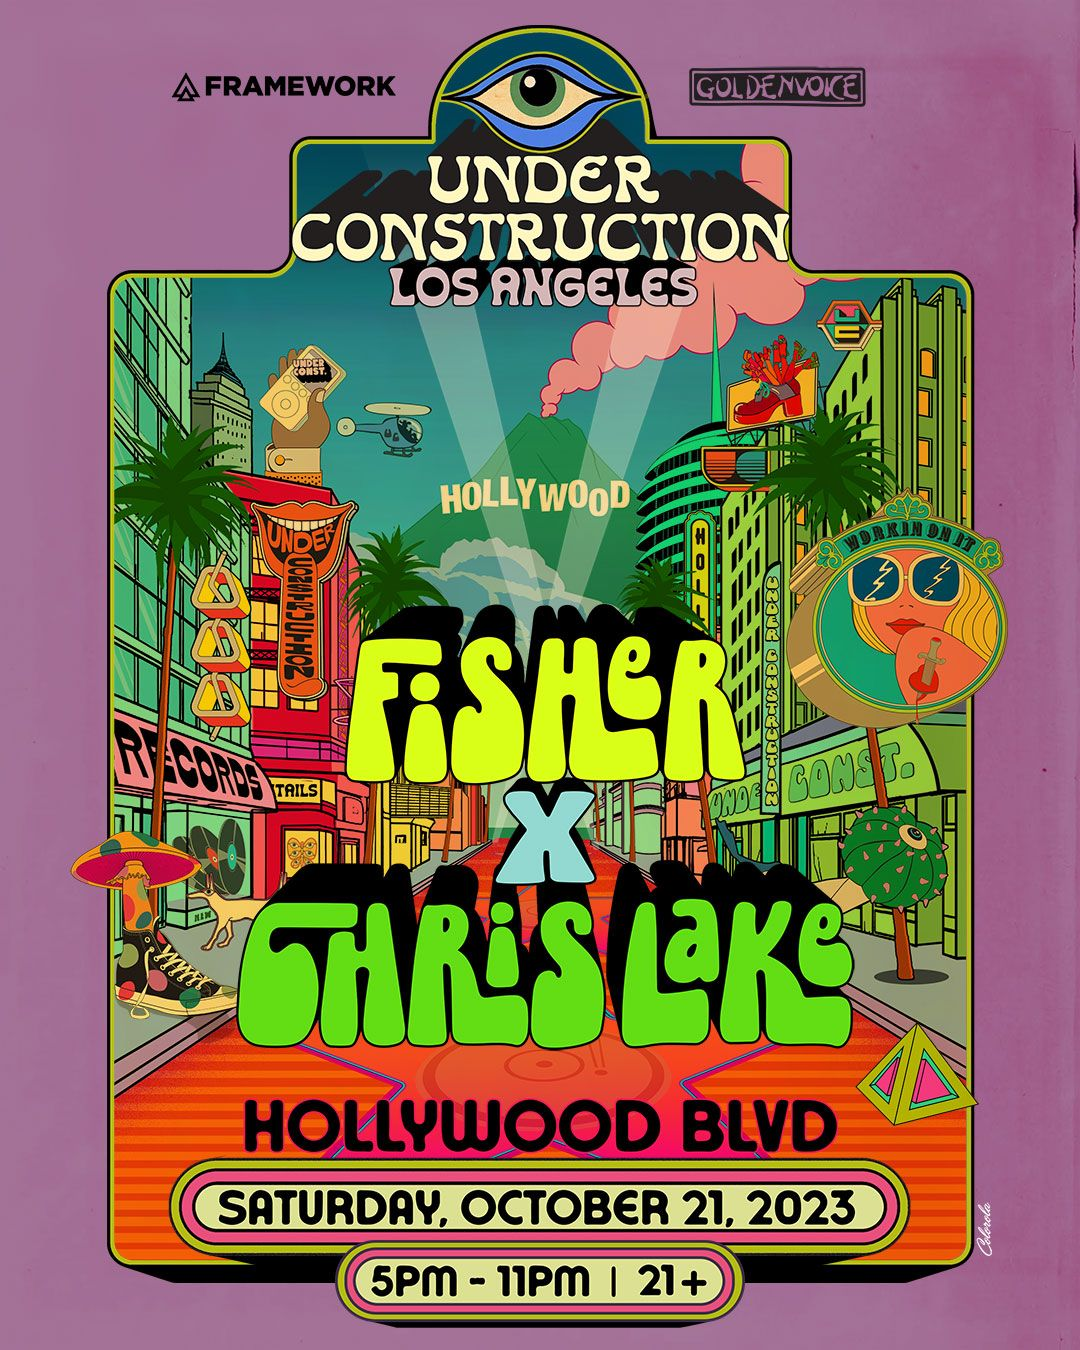 Mixture of DJs confirmed to be joining FISHER